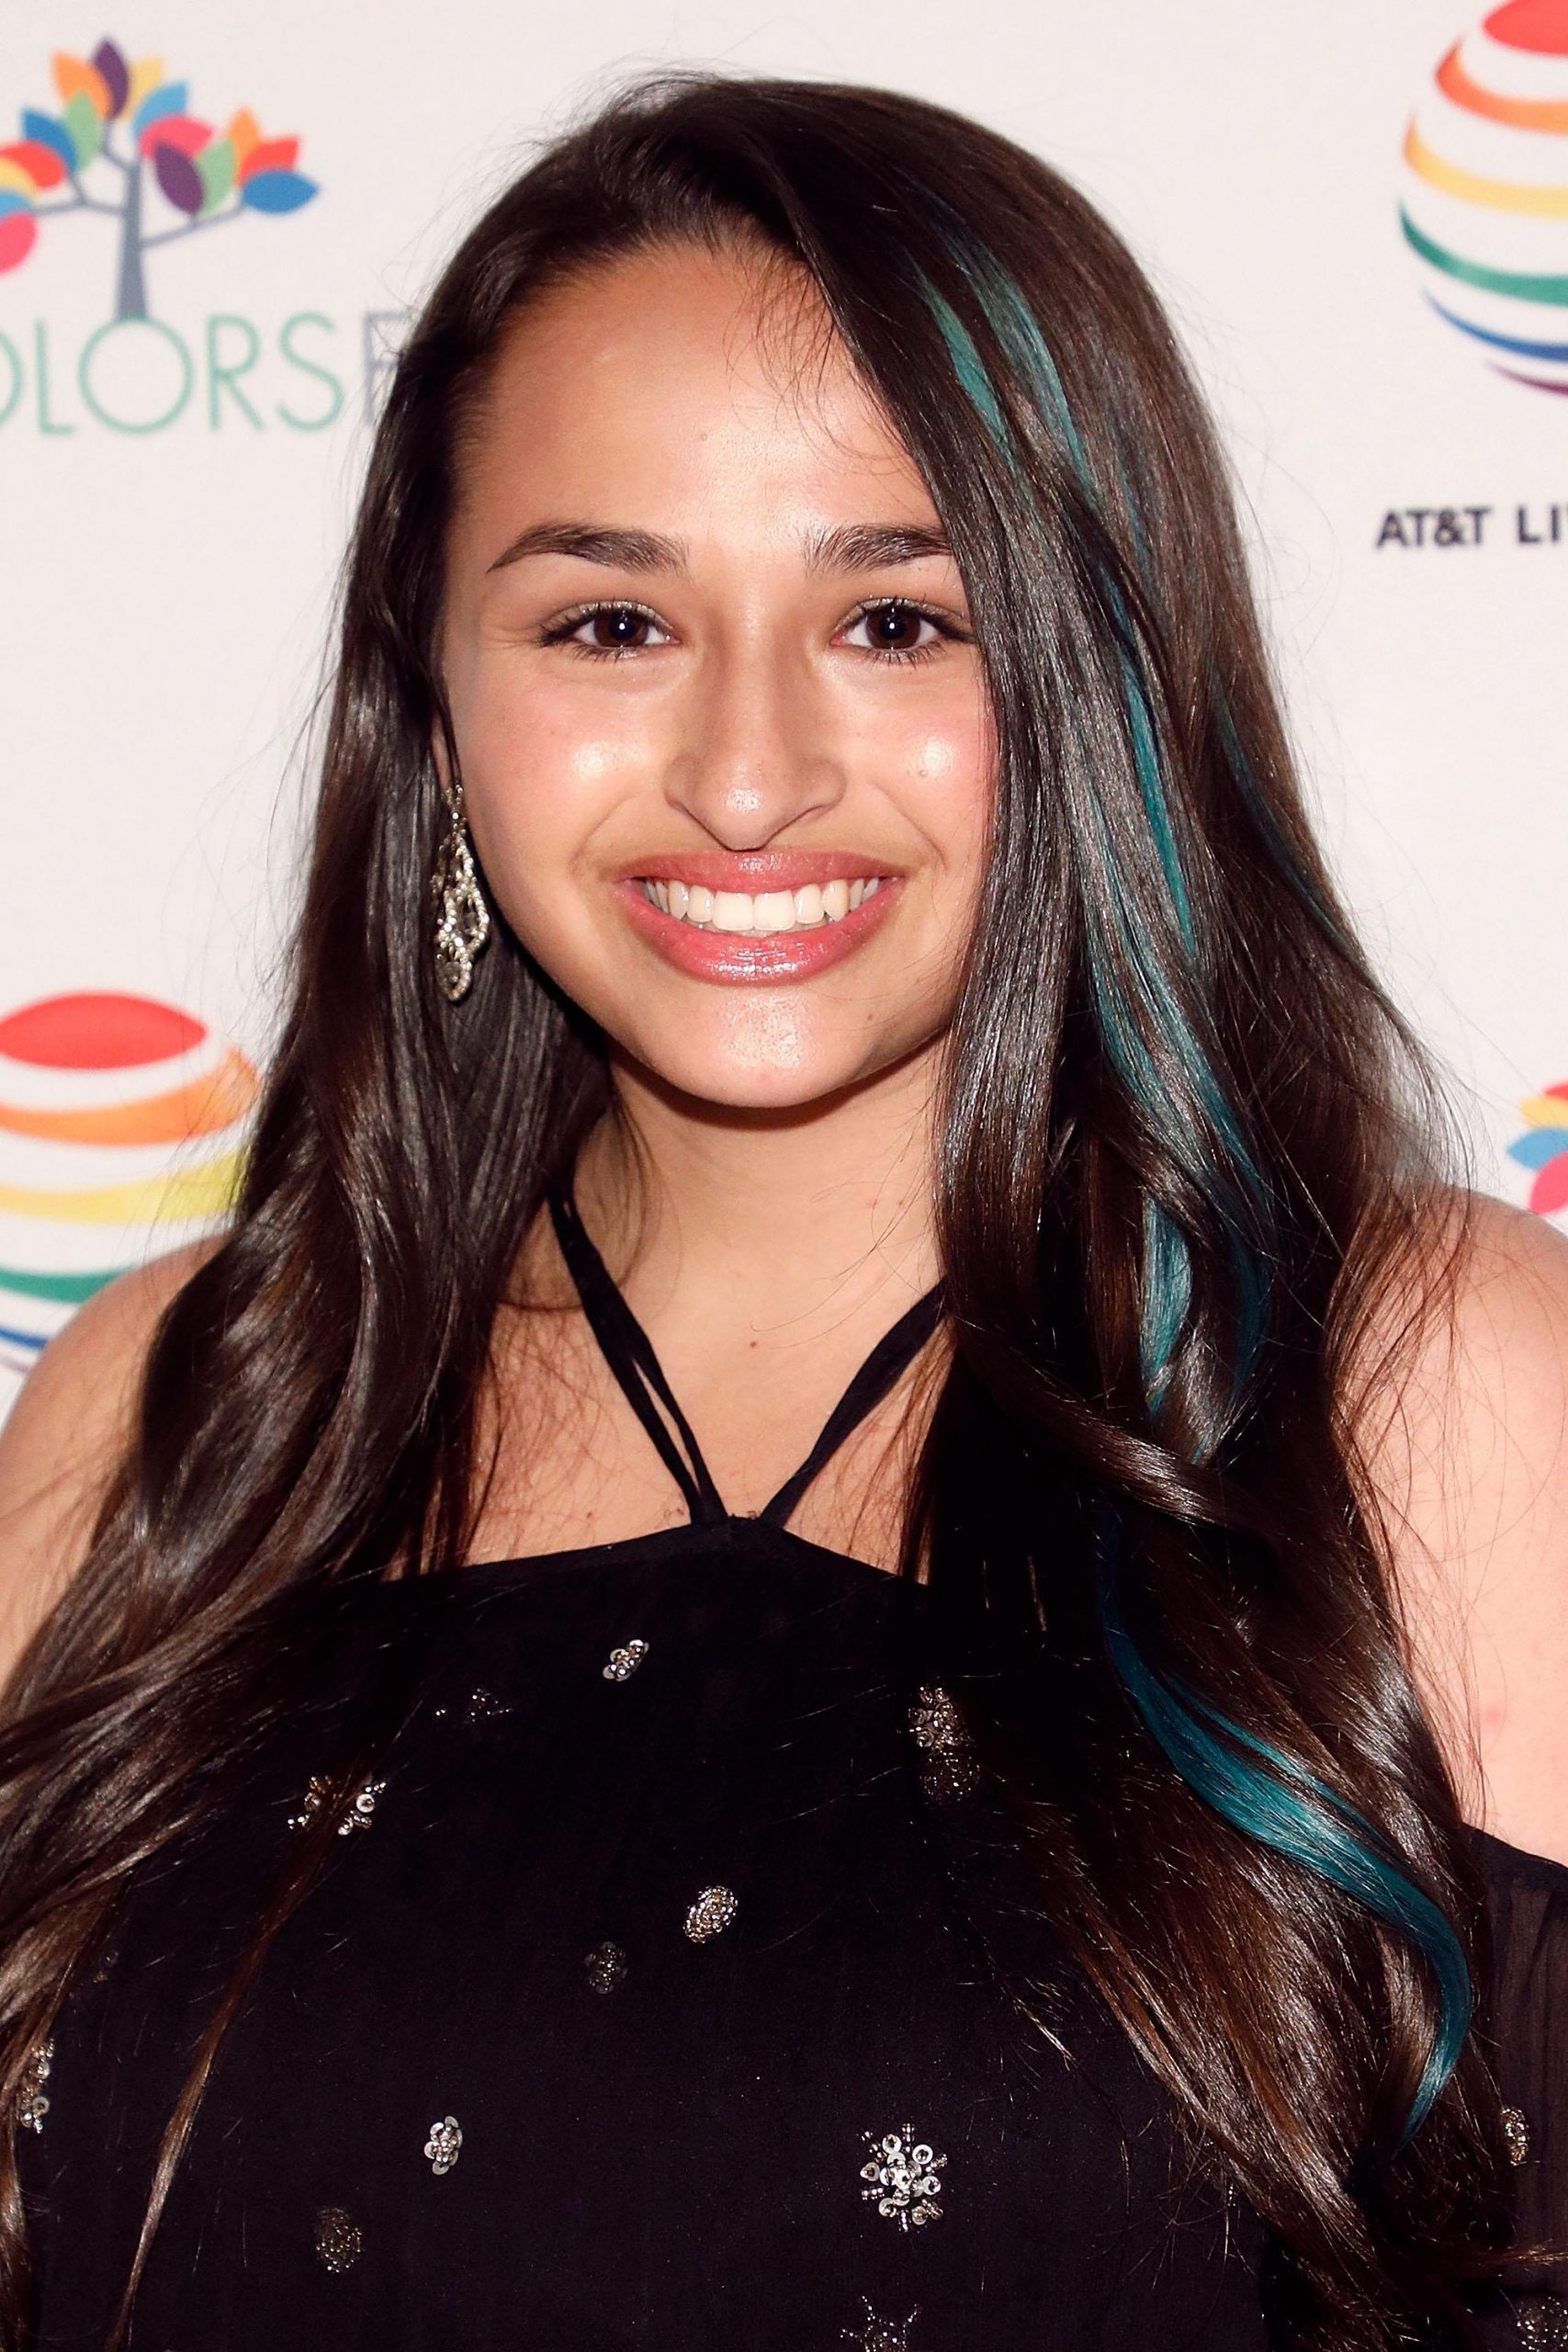 70+ Hot Pictures Of Jazz Jennings Which Will Make Your Mouth Water 371